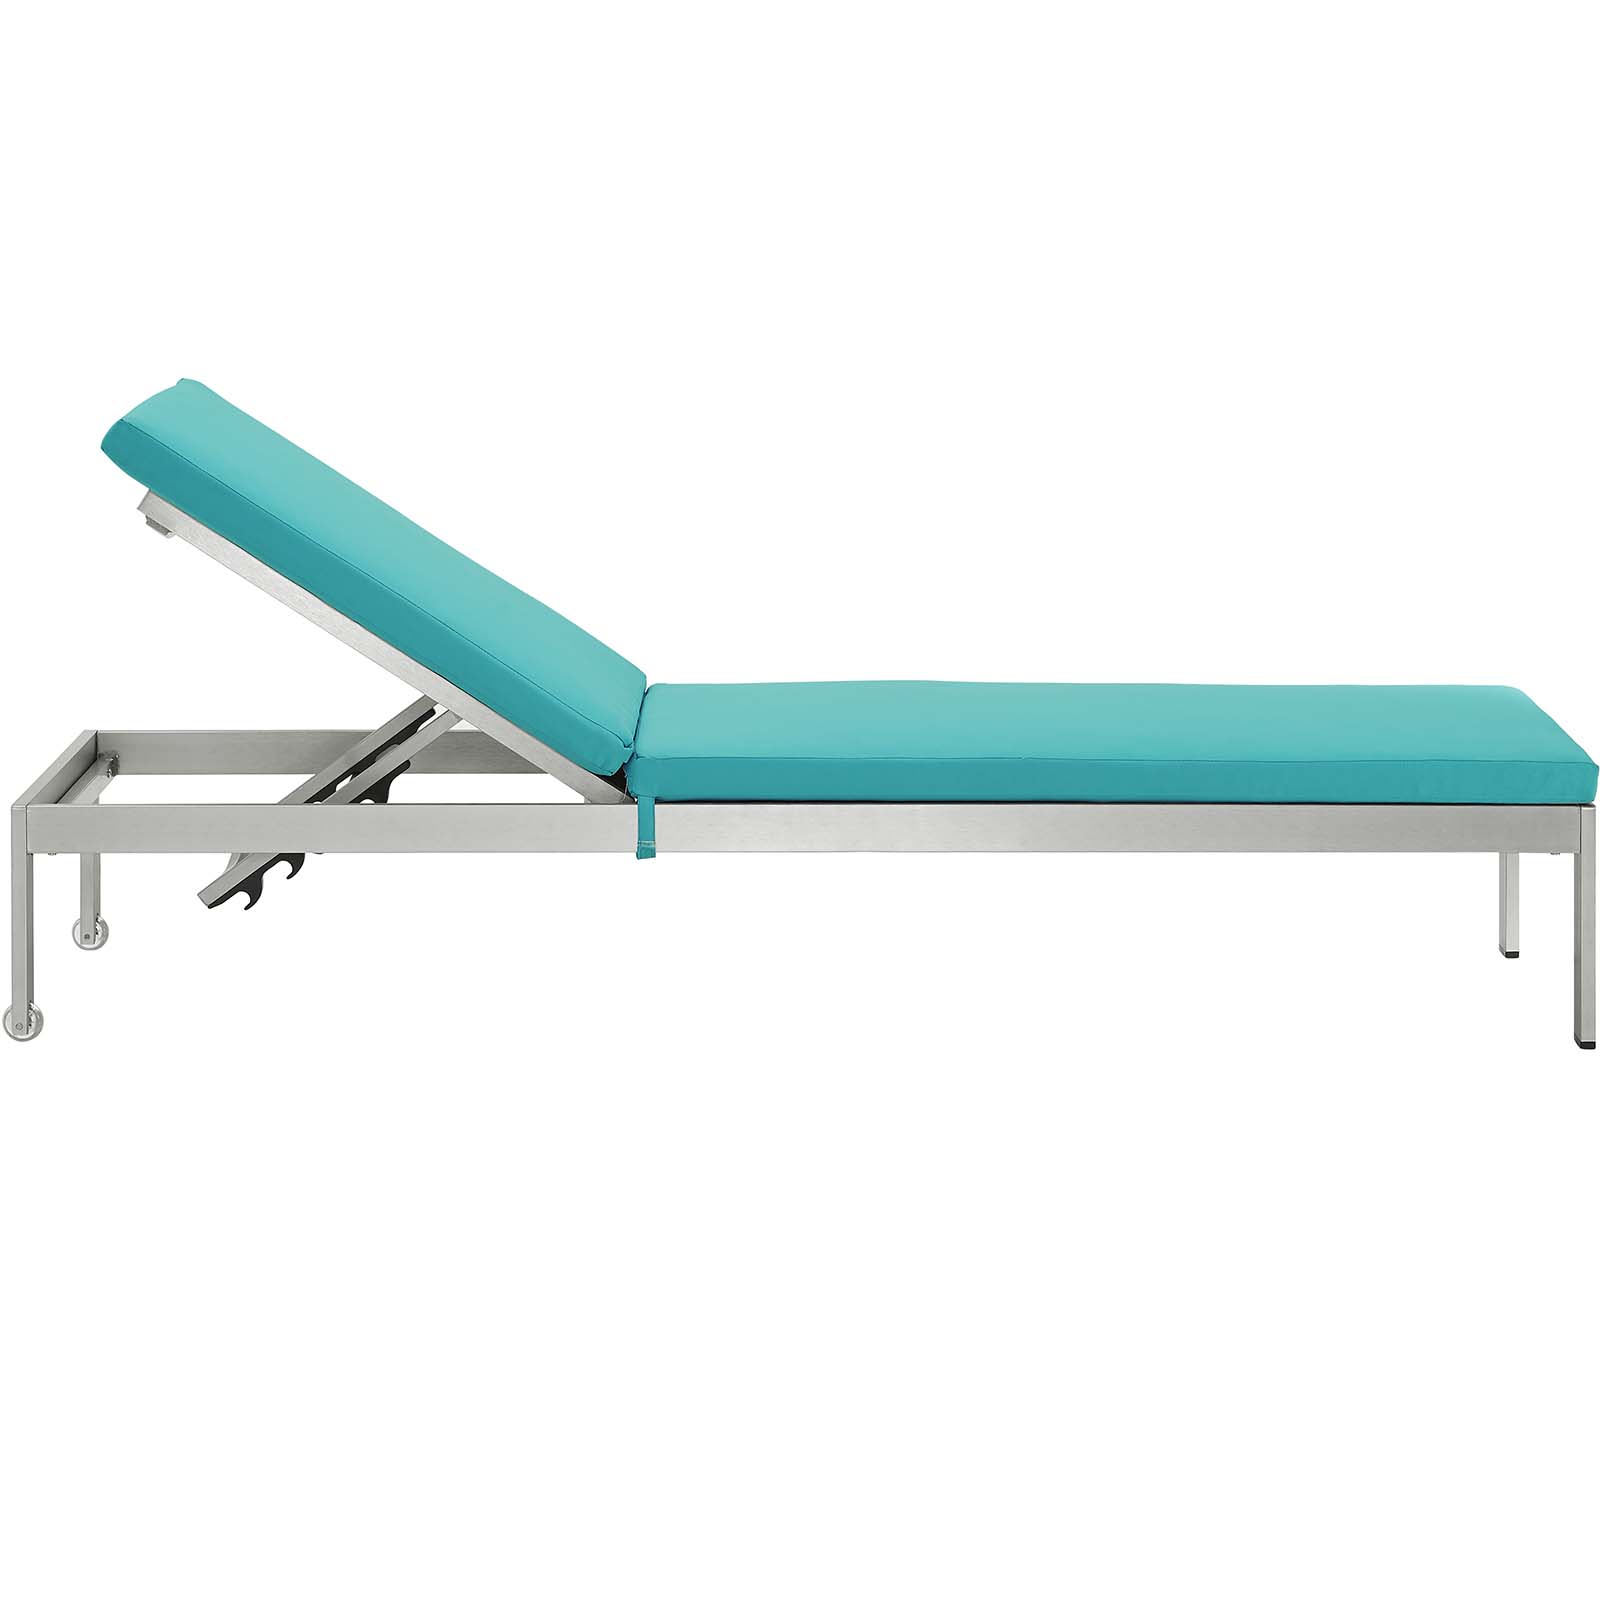 Modern Contemporary Urban Design Outdoor Patio Balcony Three PCS Chaise Lounge Chair, Blue, Aluminum - image 5 of 8